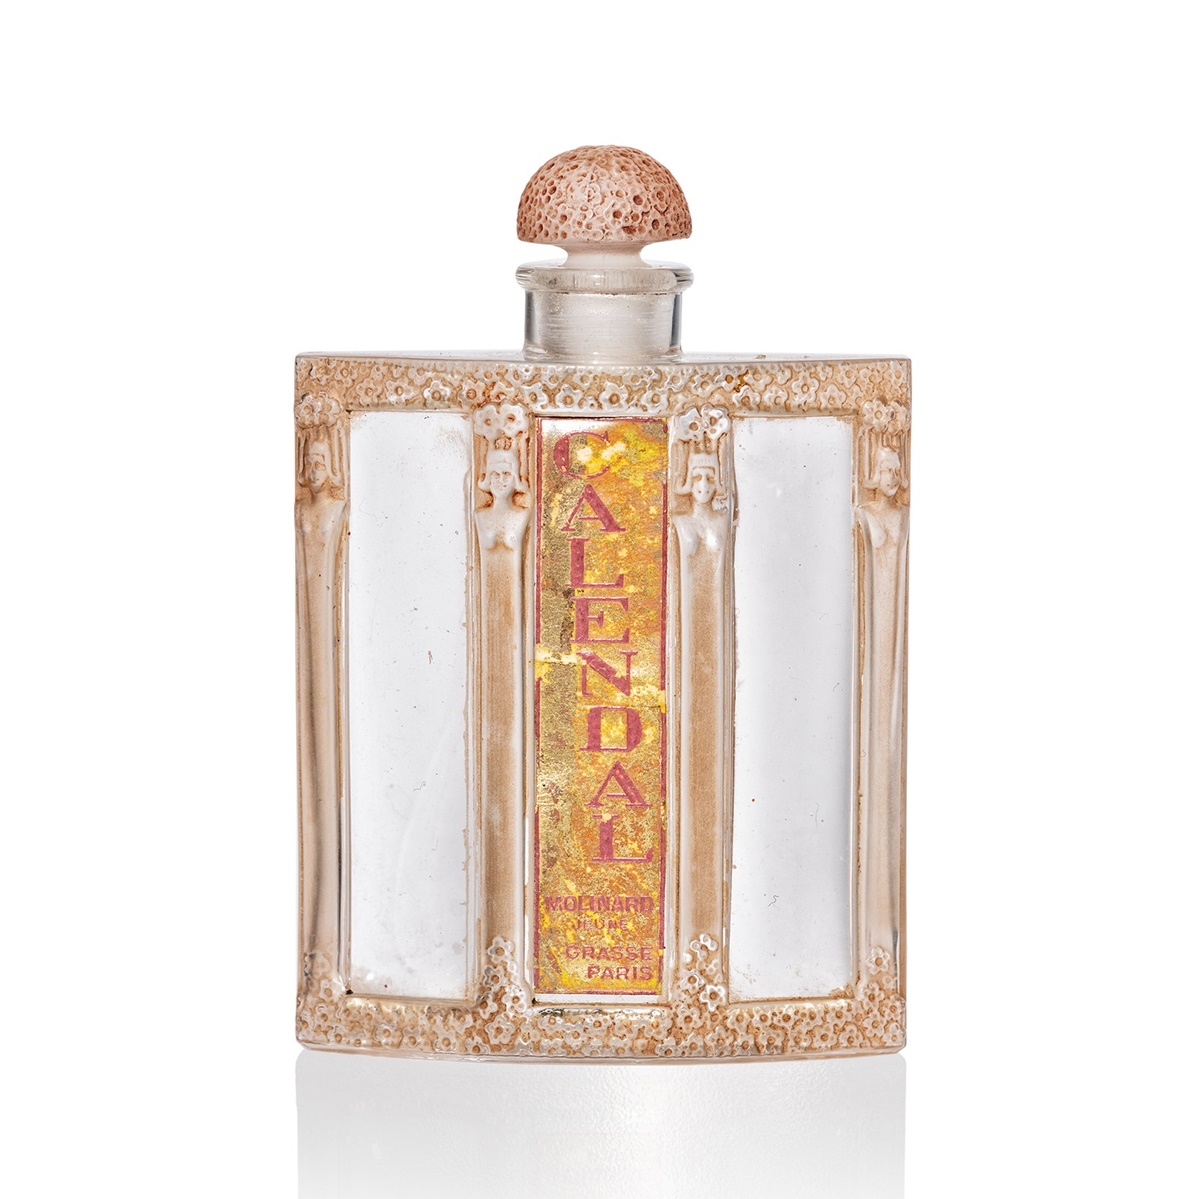 RENÉ LALIQUE (FRENCH 1860-1945) | CALENDAL SCENT BOTTLE, MOLINARD - 1 | Sold for £10,080*